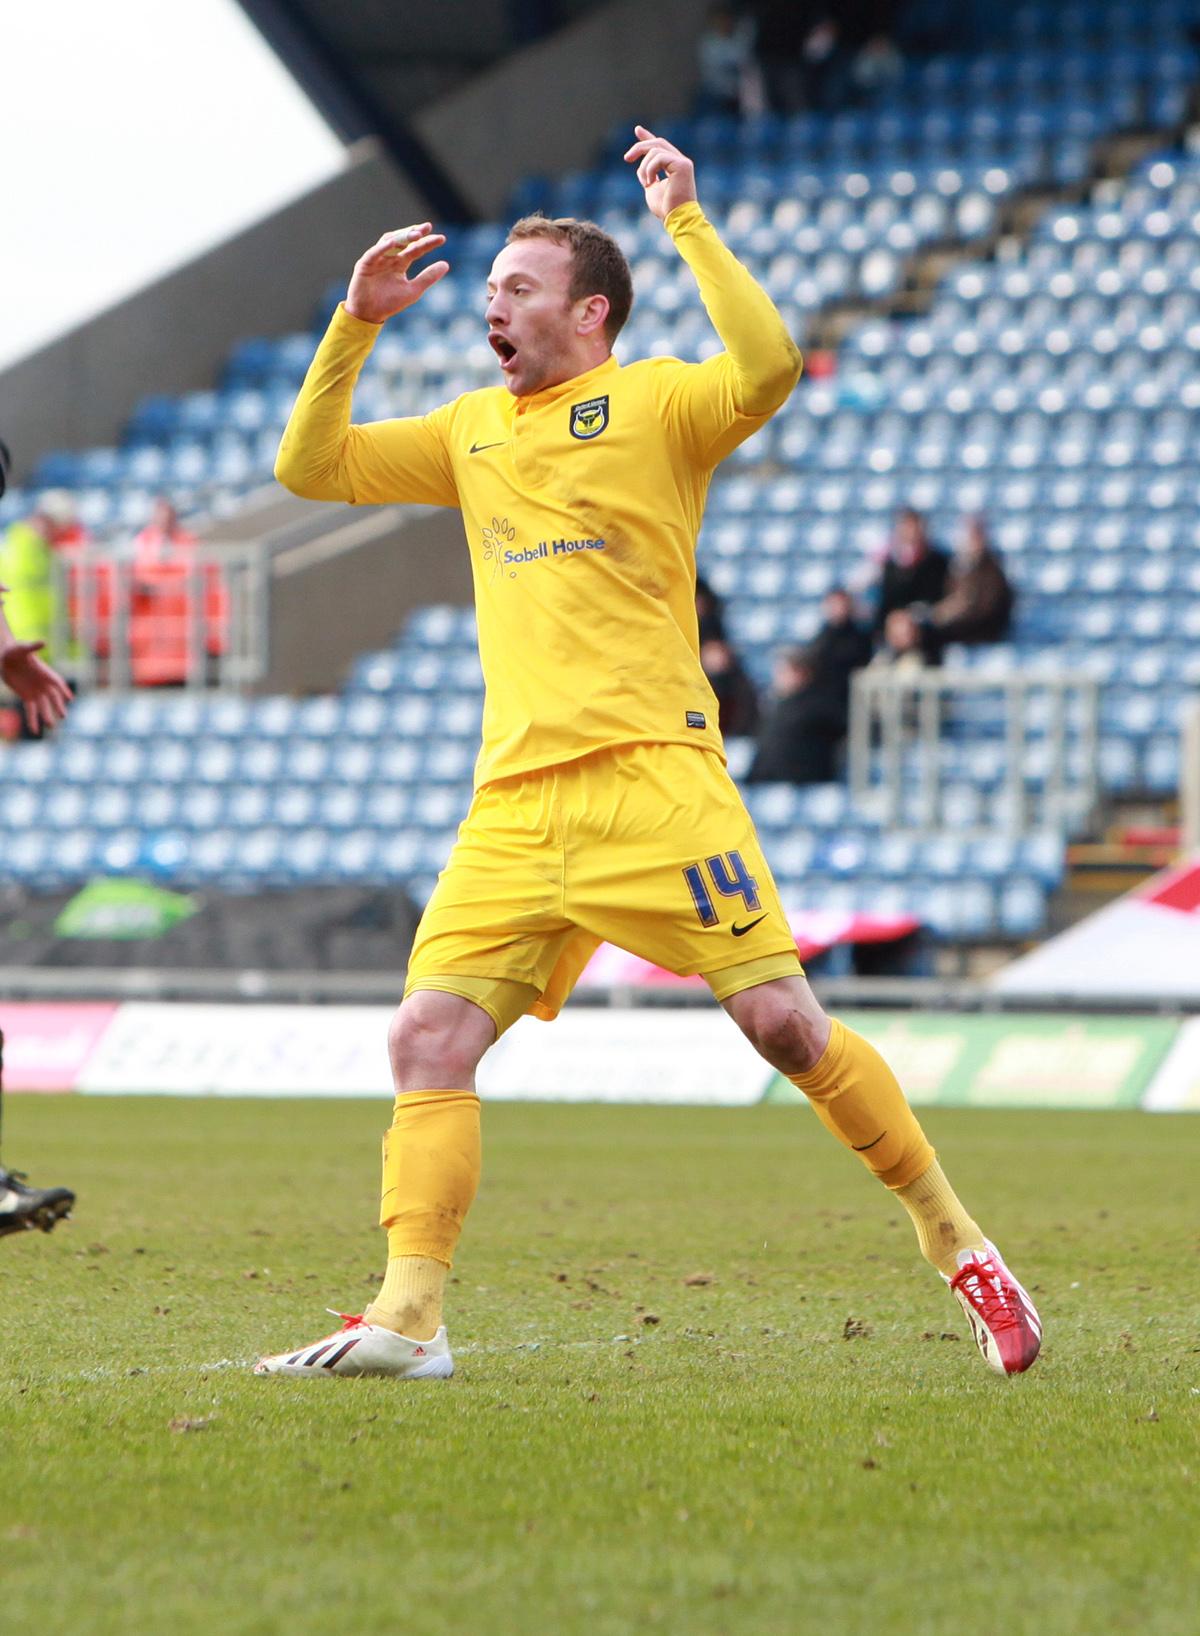 Oxford United were hit by a body-blow as Morecambe scored with just seconds remaining to claim a share of the points. 